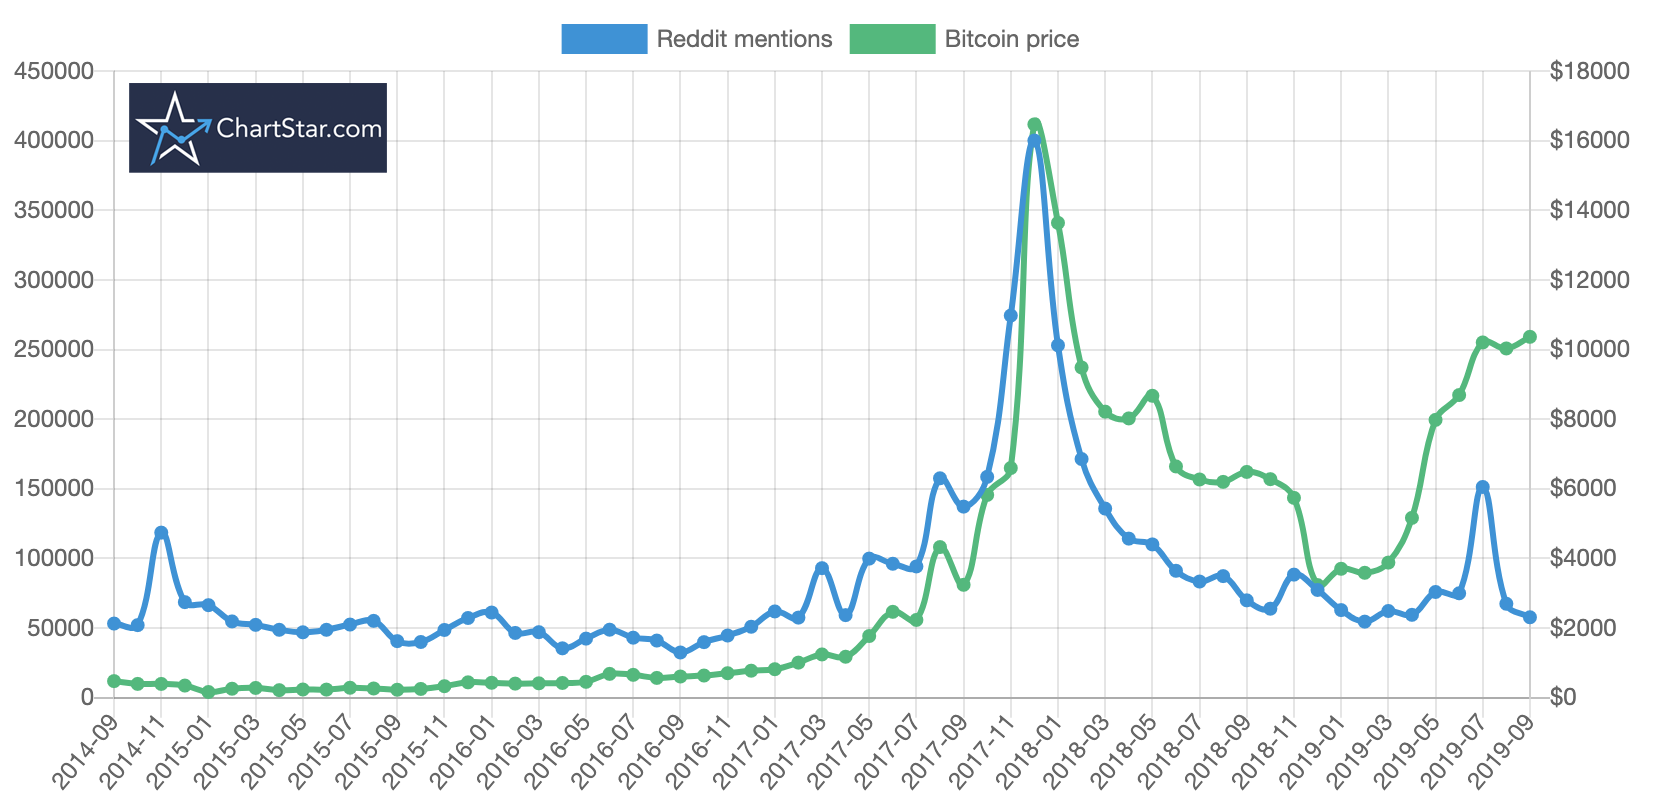 Analyzing The Correlation Between Bitcoin Reddit Mentions And Price